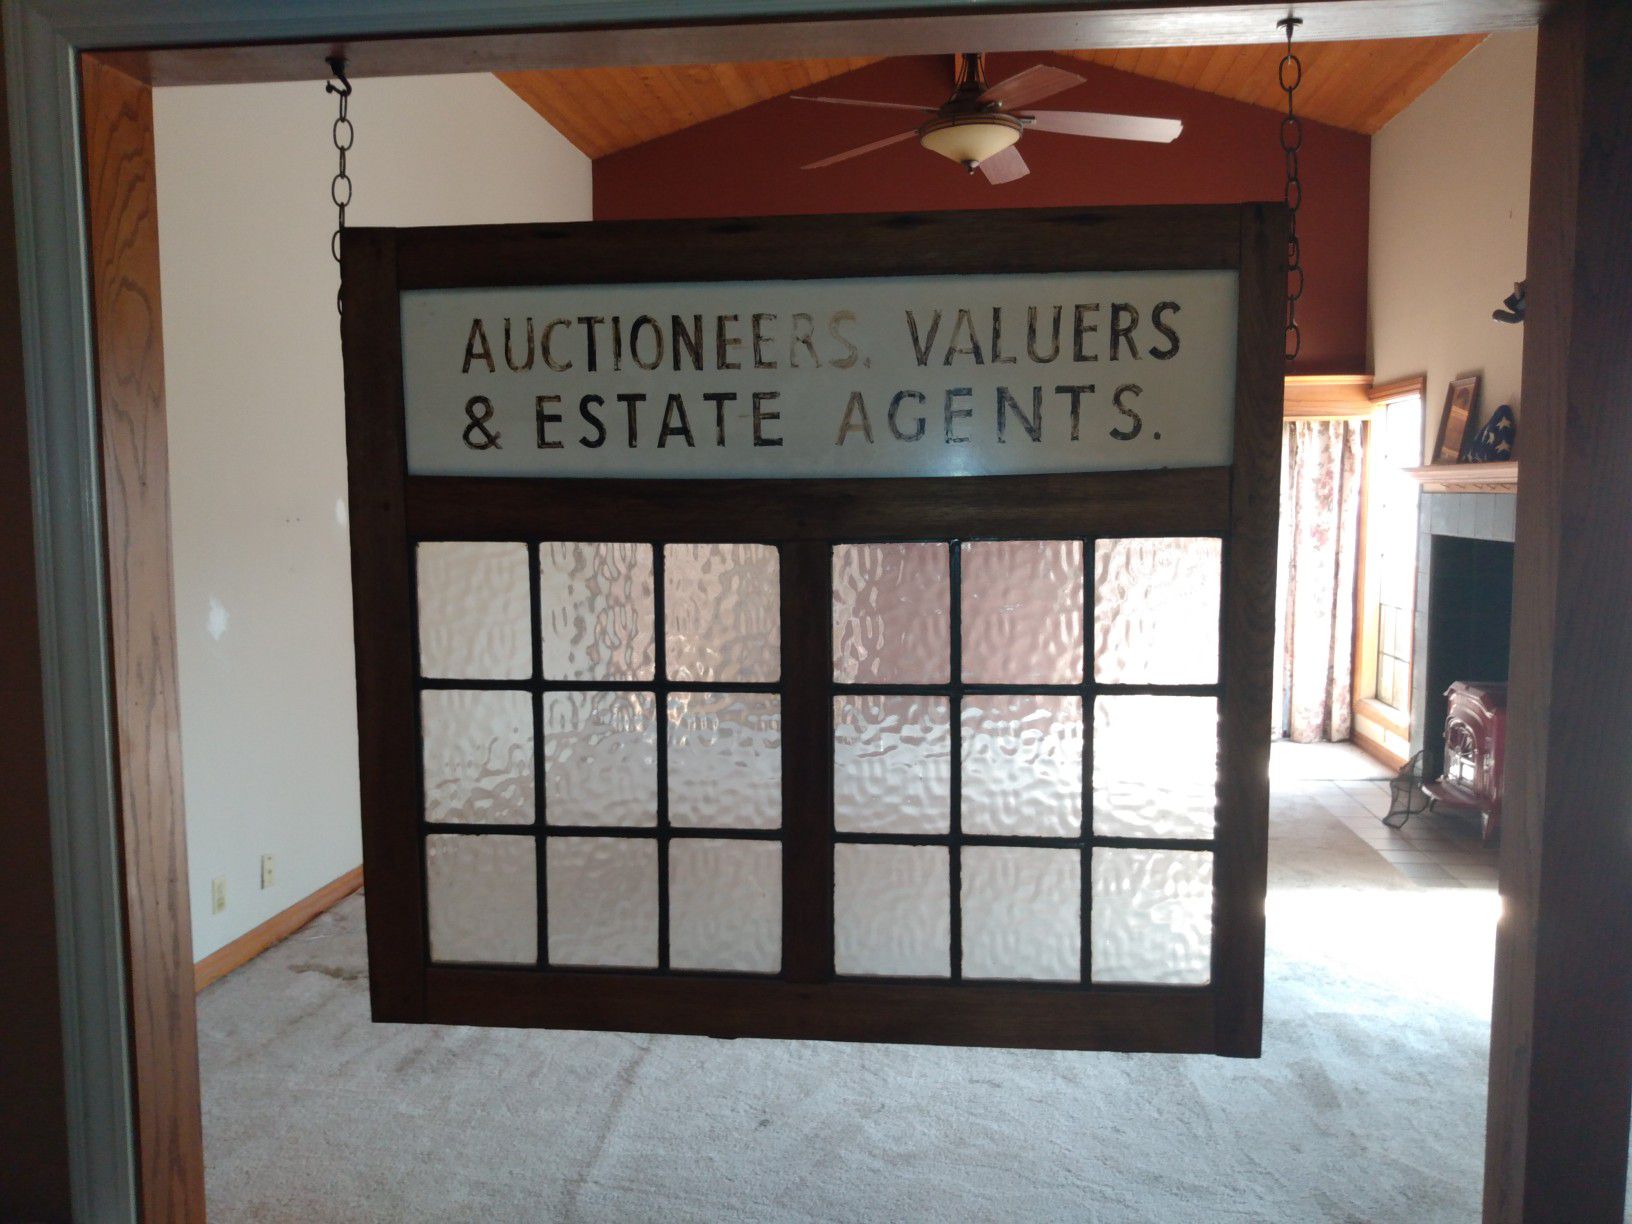 Antique Leaded glass window with business name